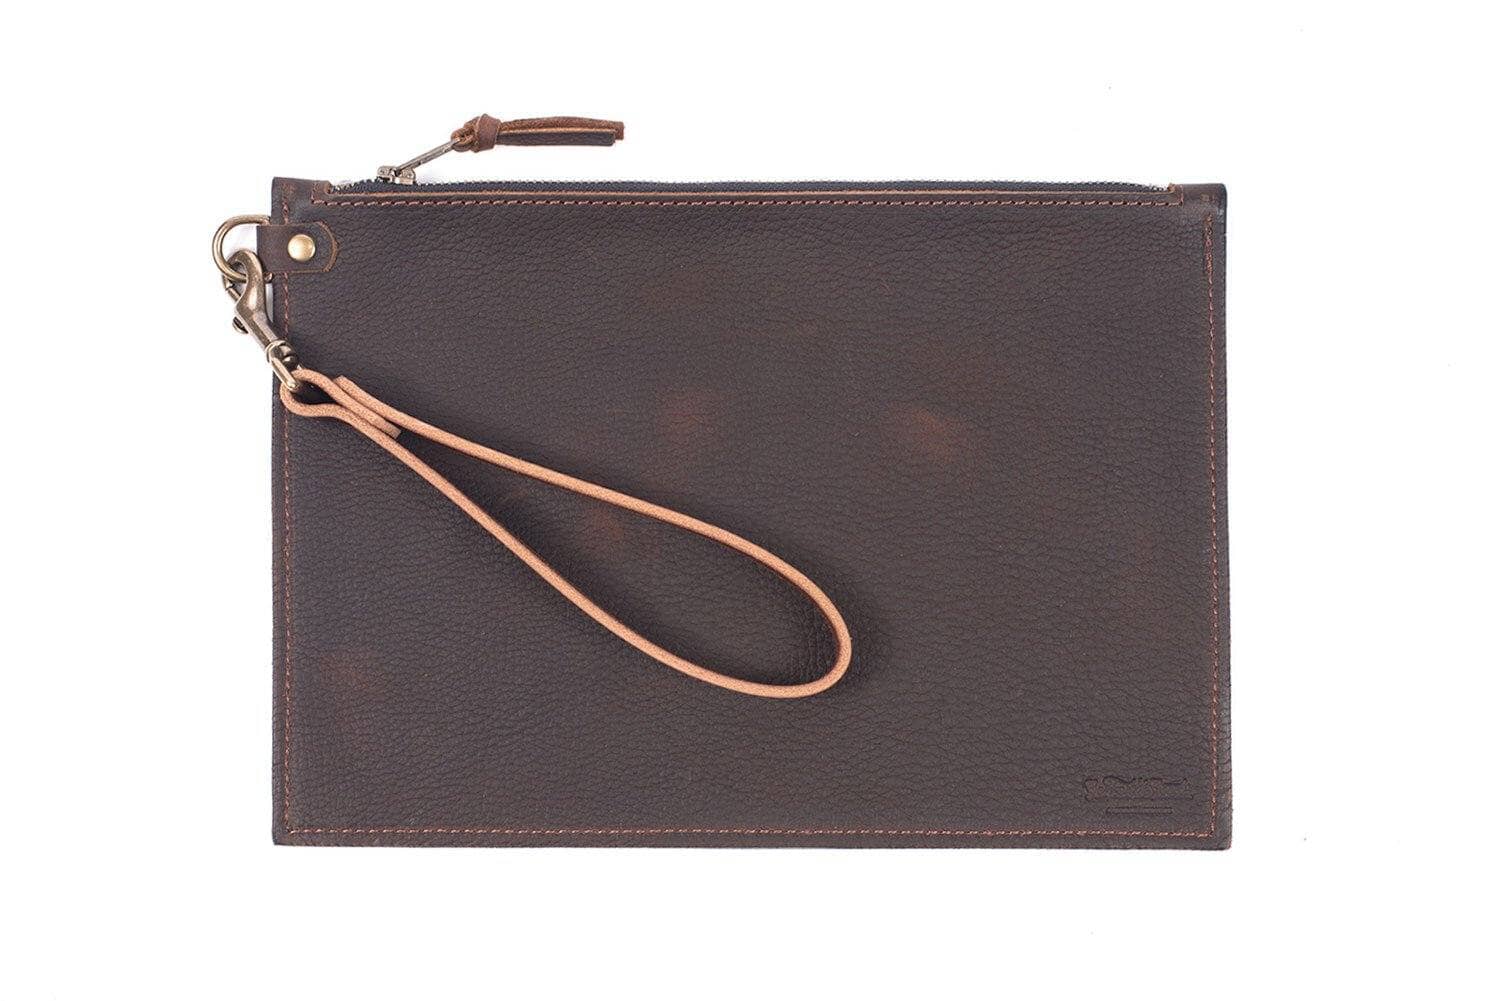 FELICITY ZIPPERED CLUTCH WITH WRISTLET LARGE - MOCHA